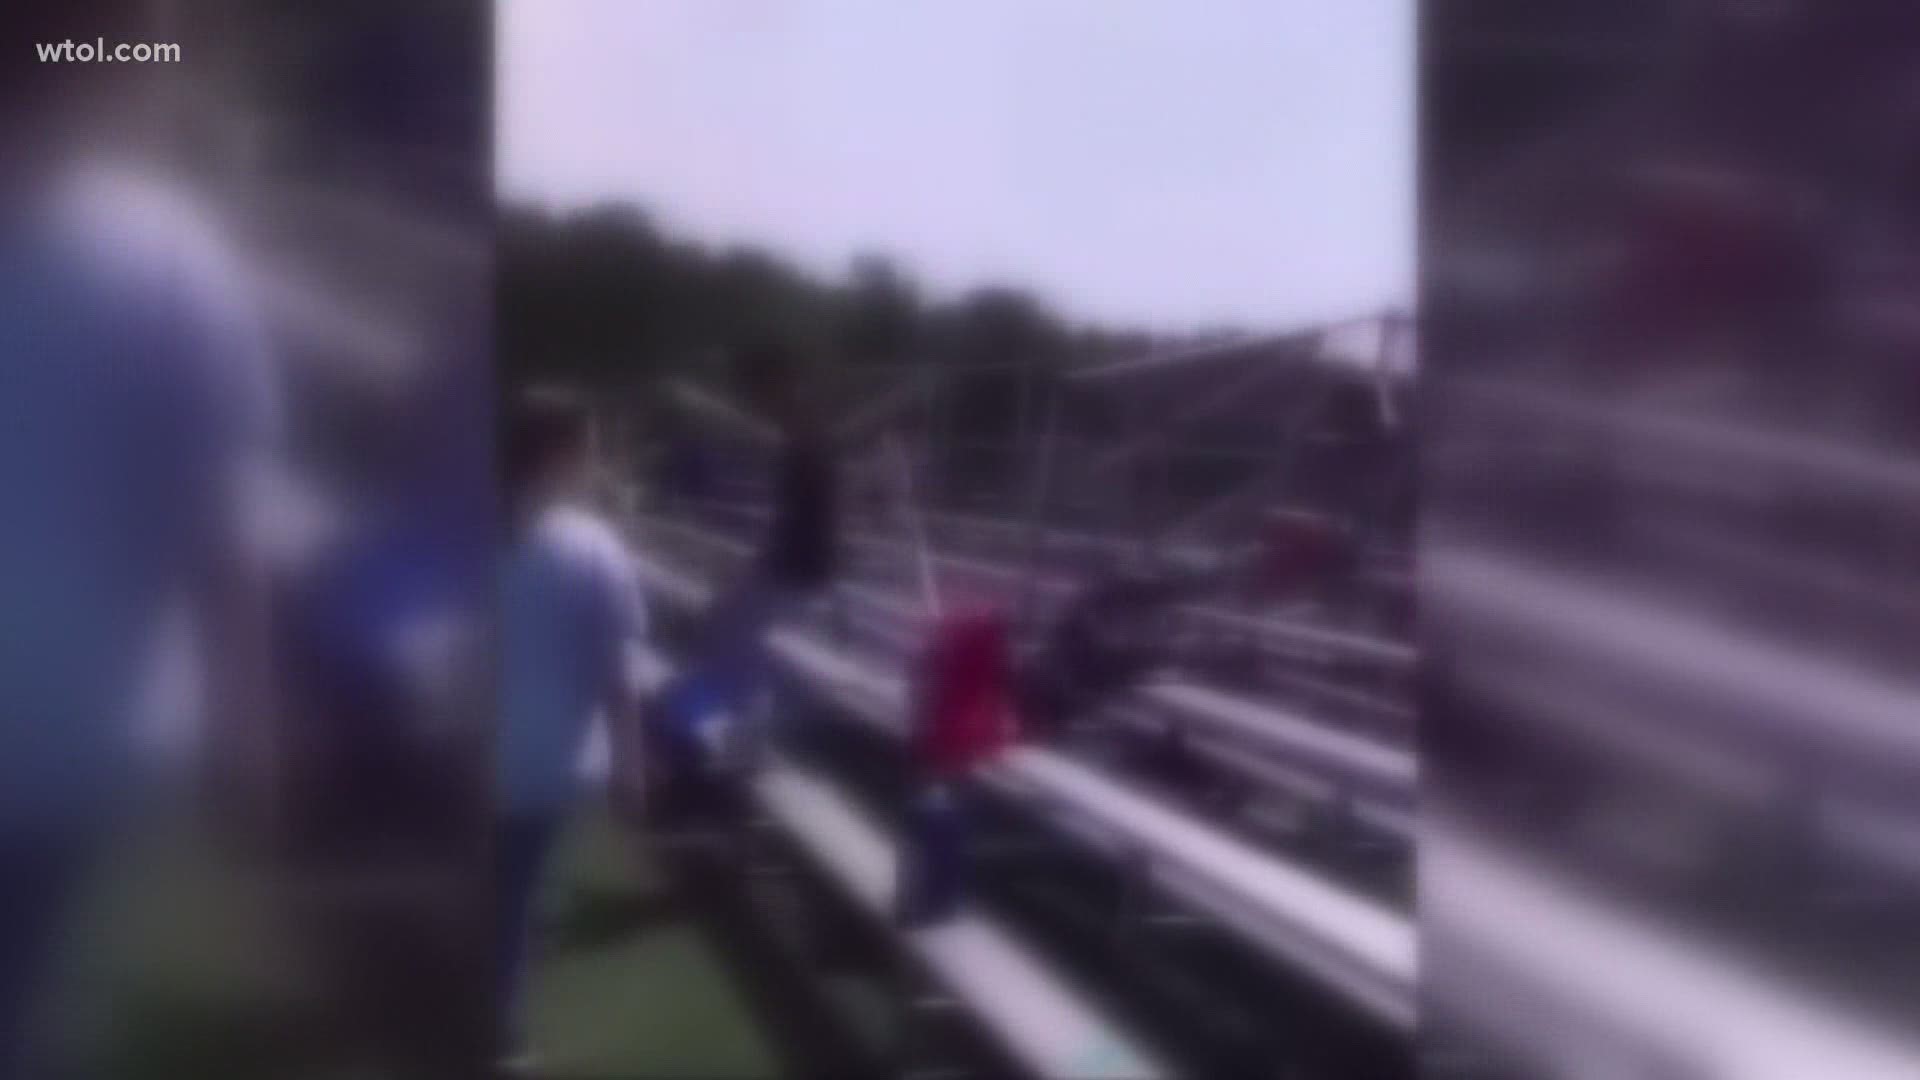 The video shows another student approaching the boy from behind, grabbing him and throwing him down against the bleachers while ripping a pride flag from his neck.